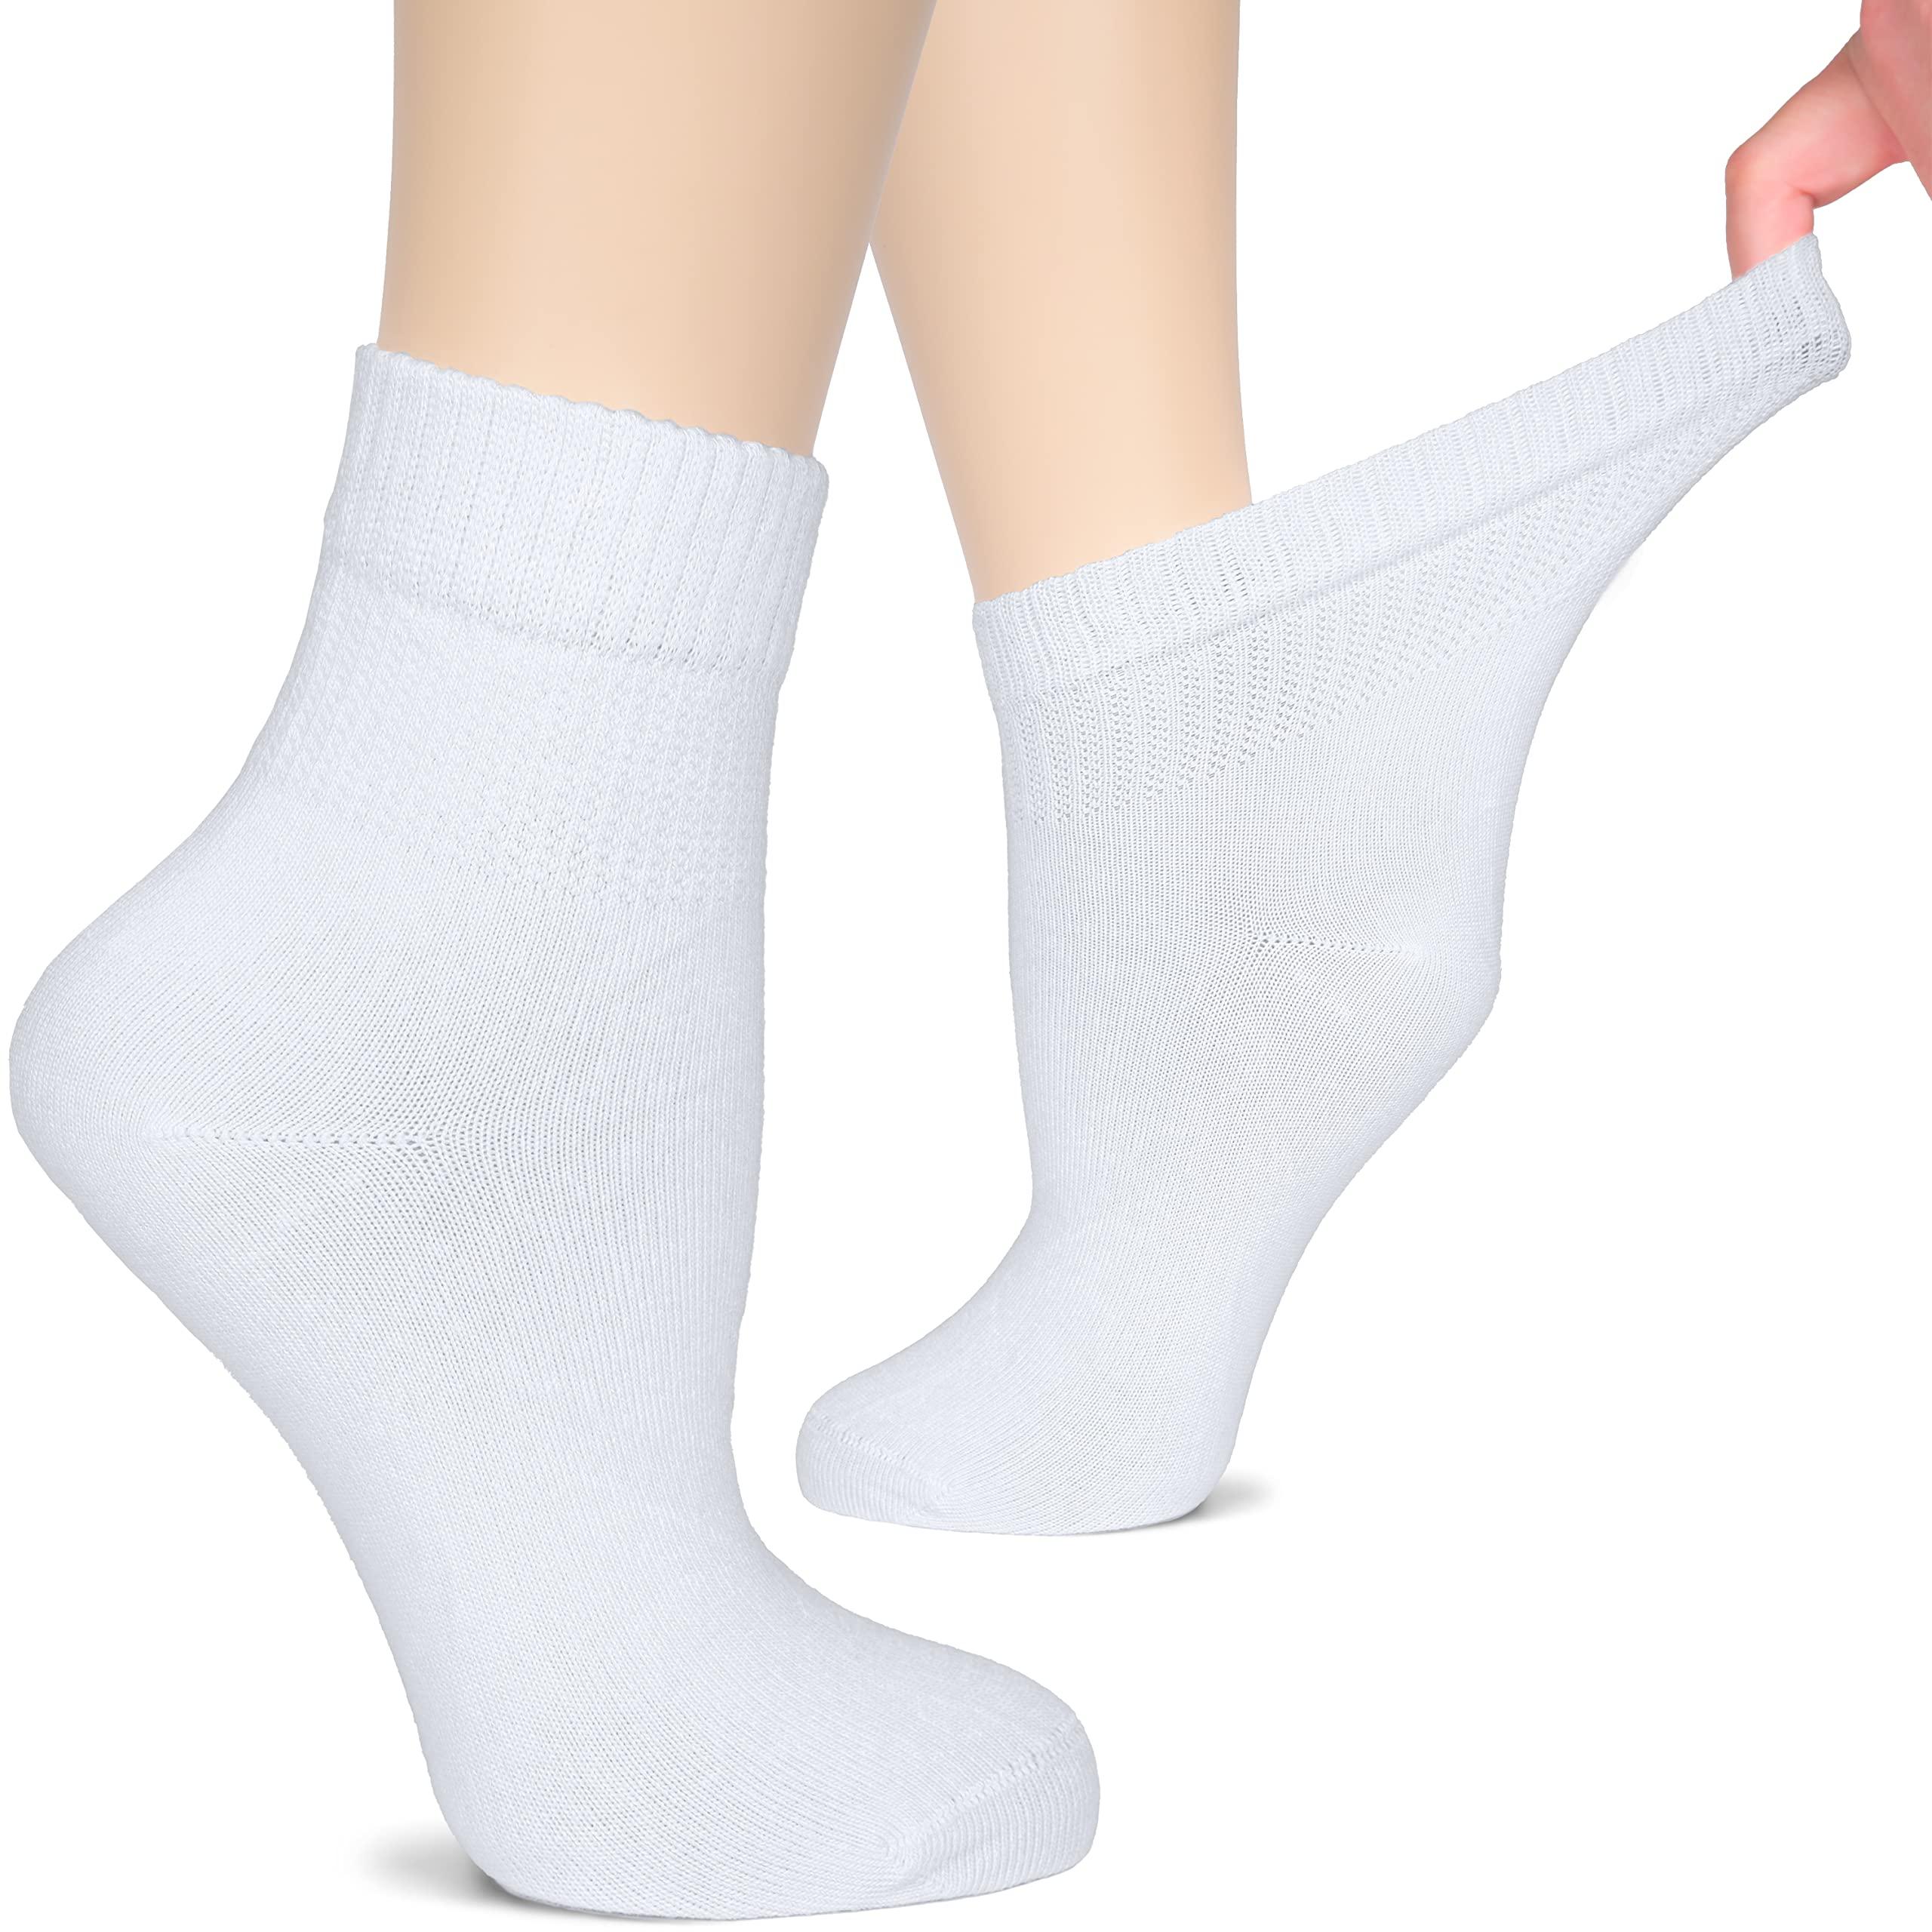 Hugh Ugoli Womens Bamboo Ankle Loose Fit Diabetic Socks, Soft, Seamless Toe, Wide Stretchy, Non-Binding Top, 3 Pairs, White, Shoe Size: 6-9